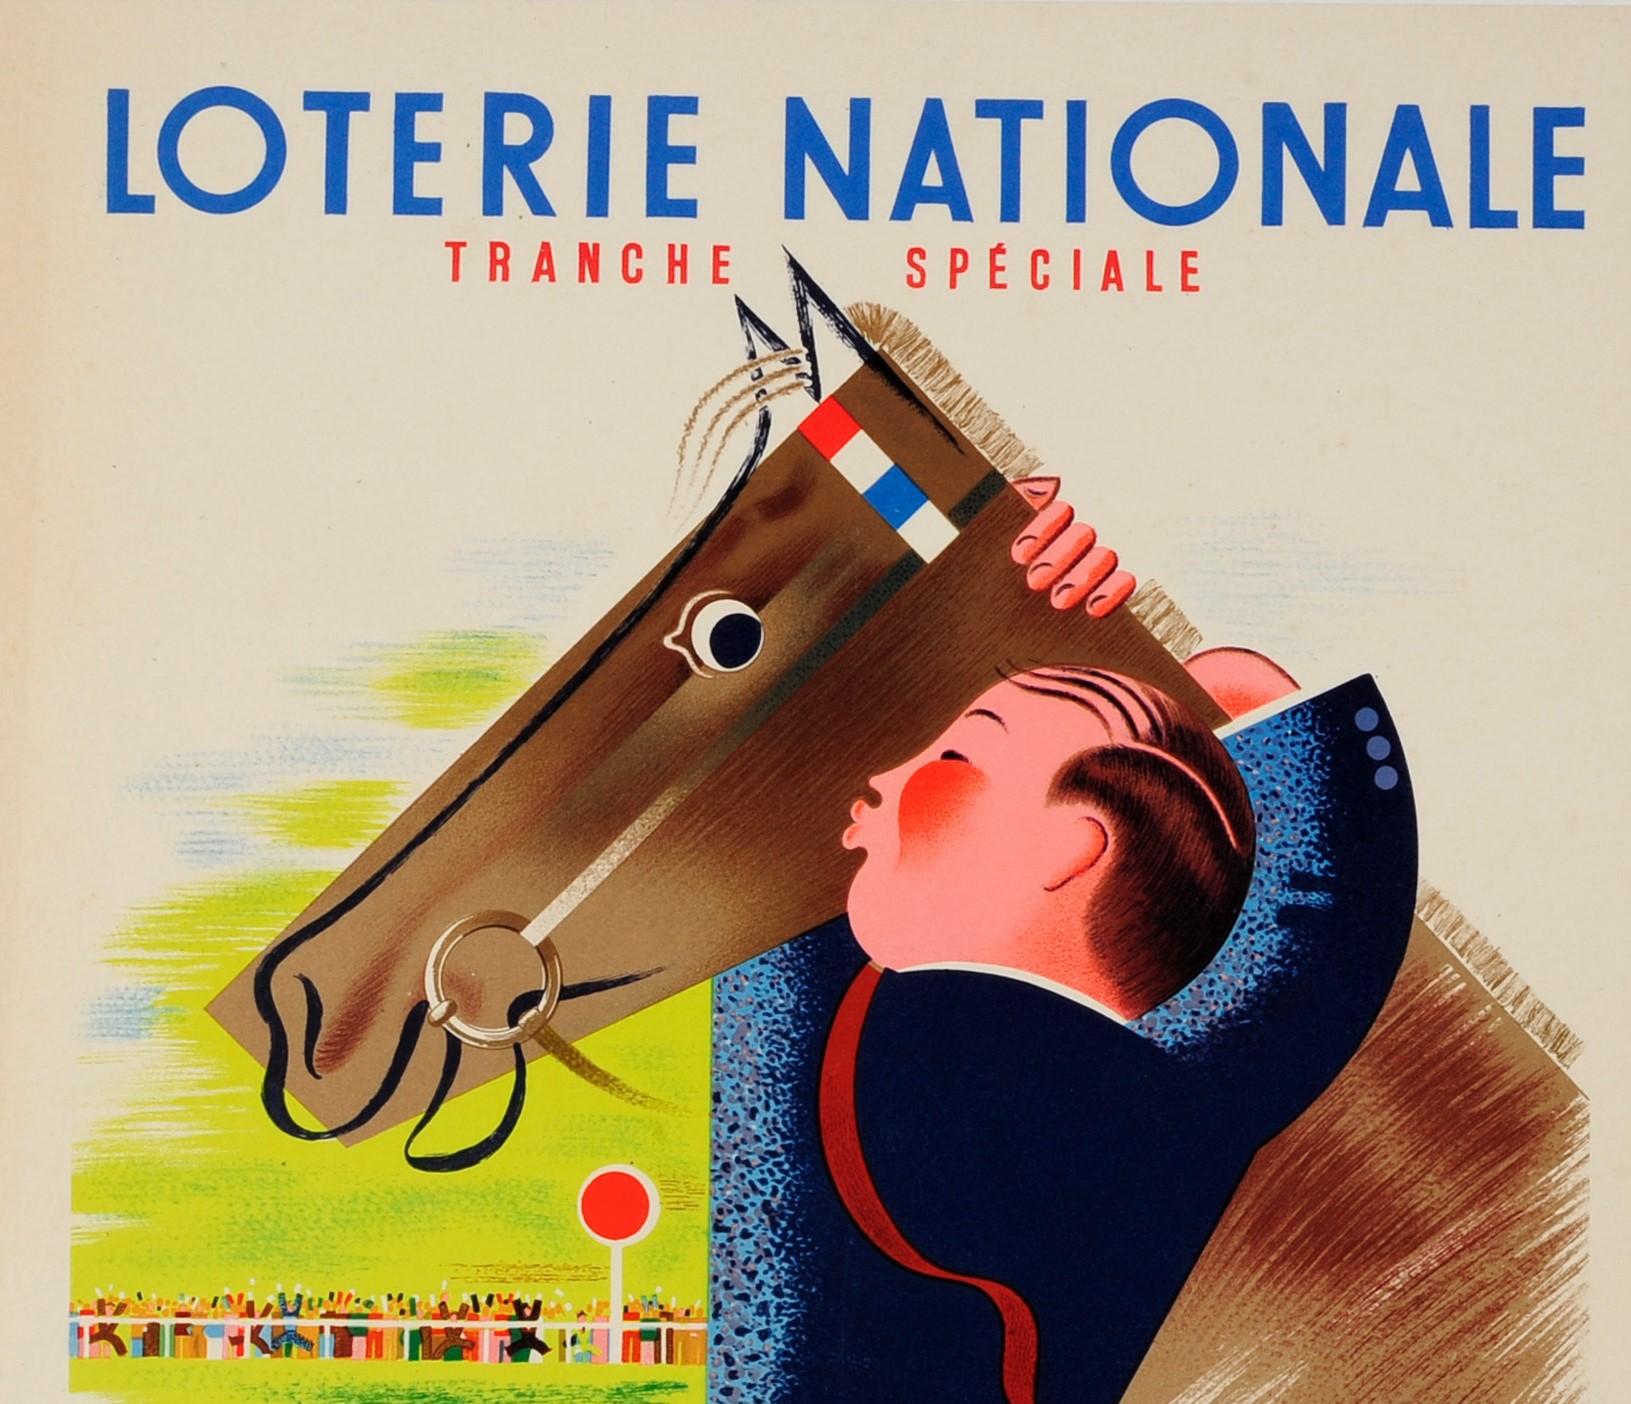 Original vintage French national lottery advertising poster for the Loterie Nationale tranche speciale Grand Prix de Paris 1938 featuring a fun and colourful horse racing design of a man in a blue suit hugging his winning horse in celebration with